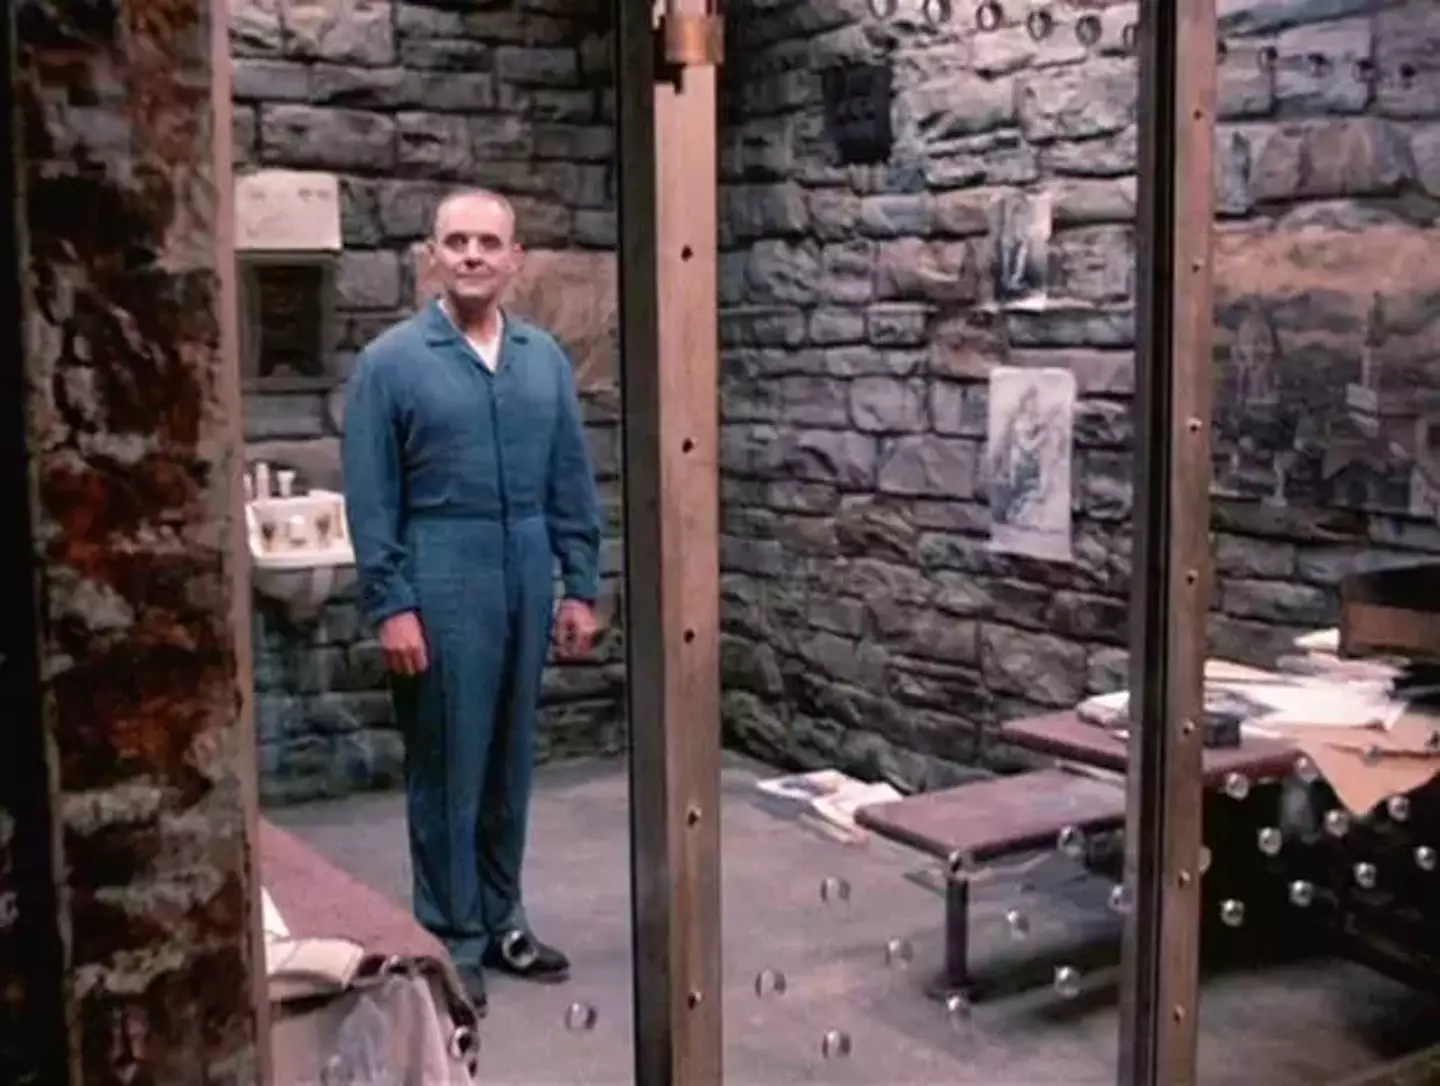 The cage has been compared to looking something like Hannibal Lecter's in 'Silence of the Lambs'.